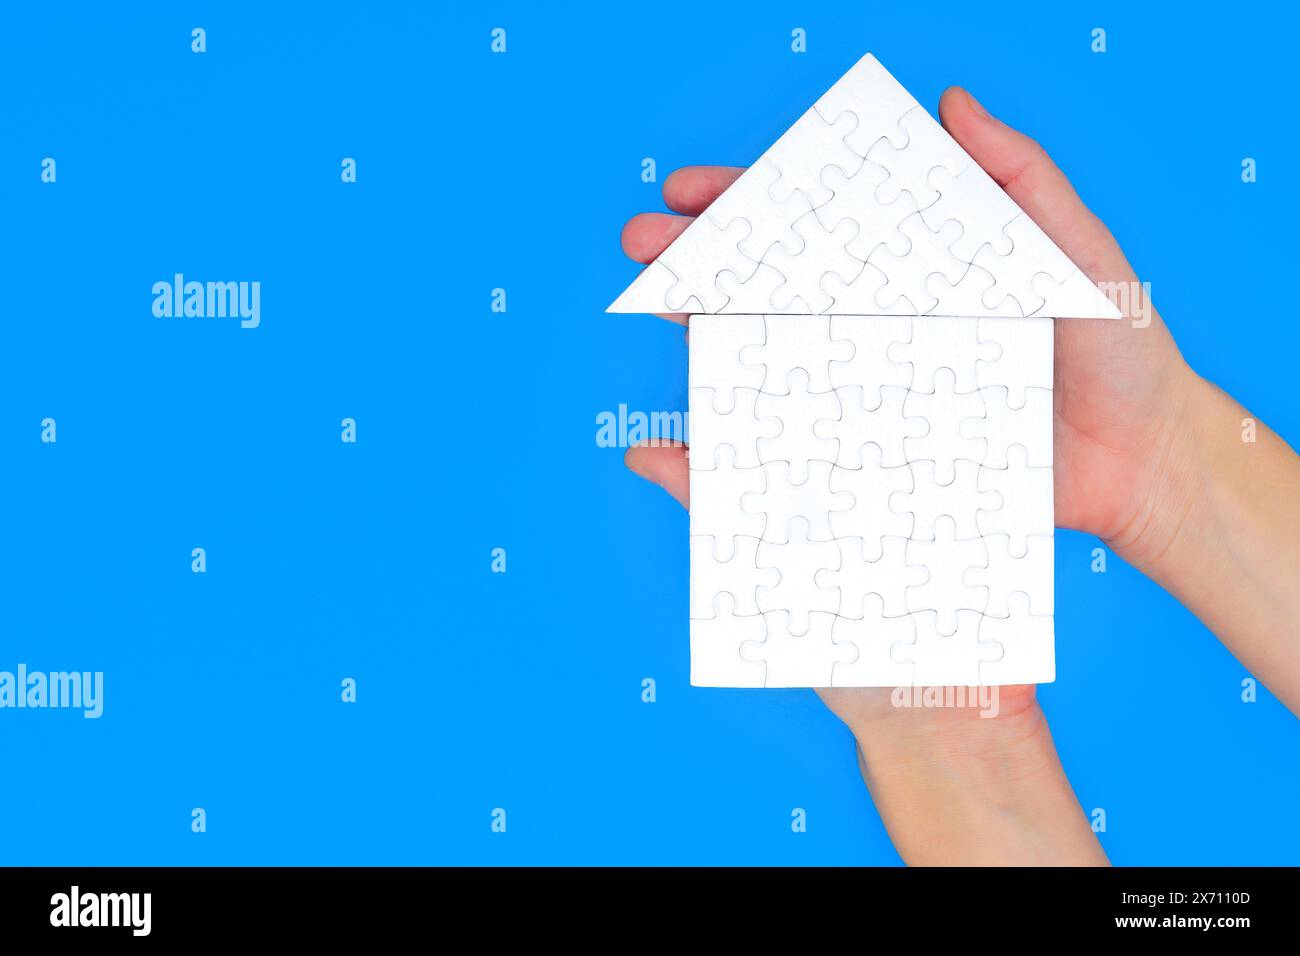 White hip roof house made up of jigsaw puzzle pieces held in both hands against pristine blue background with copy space. Stock Photo